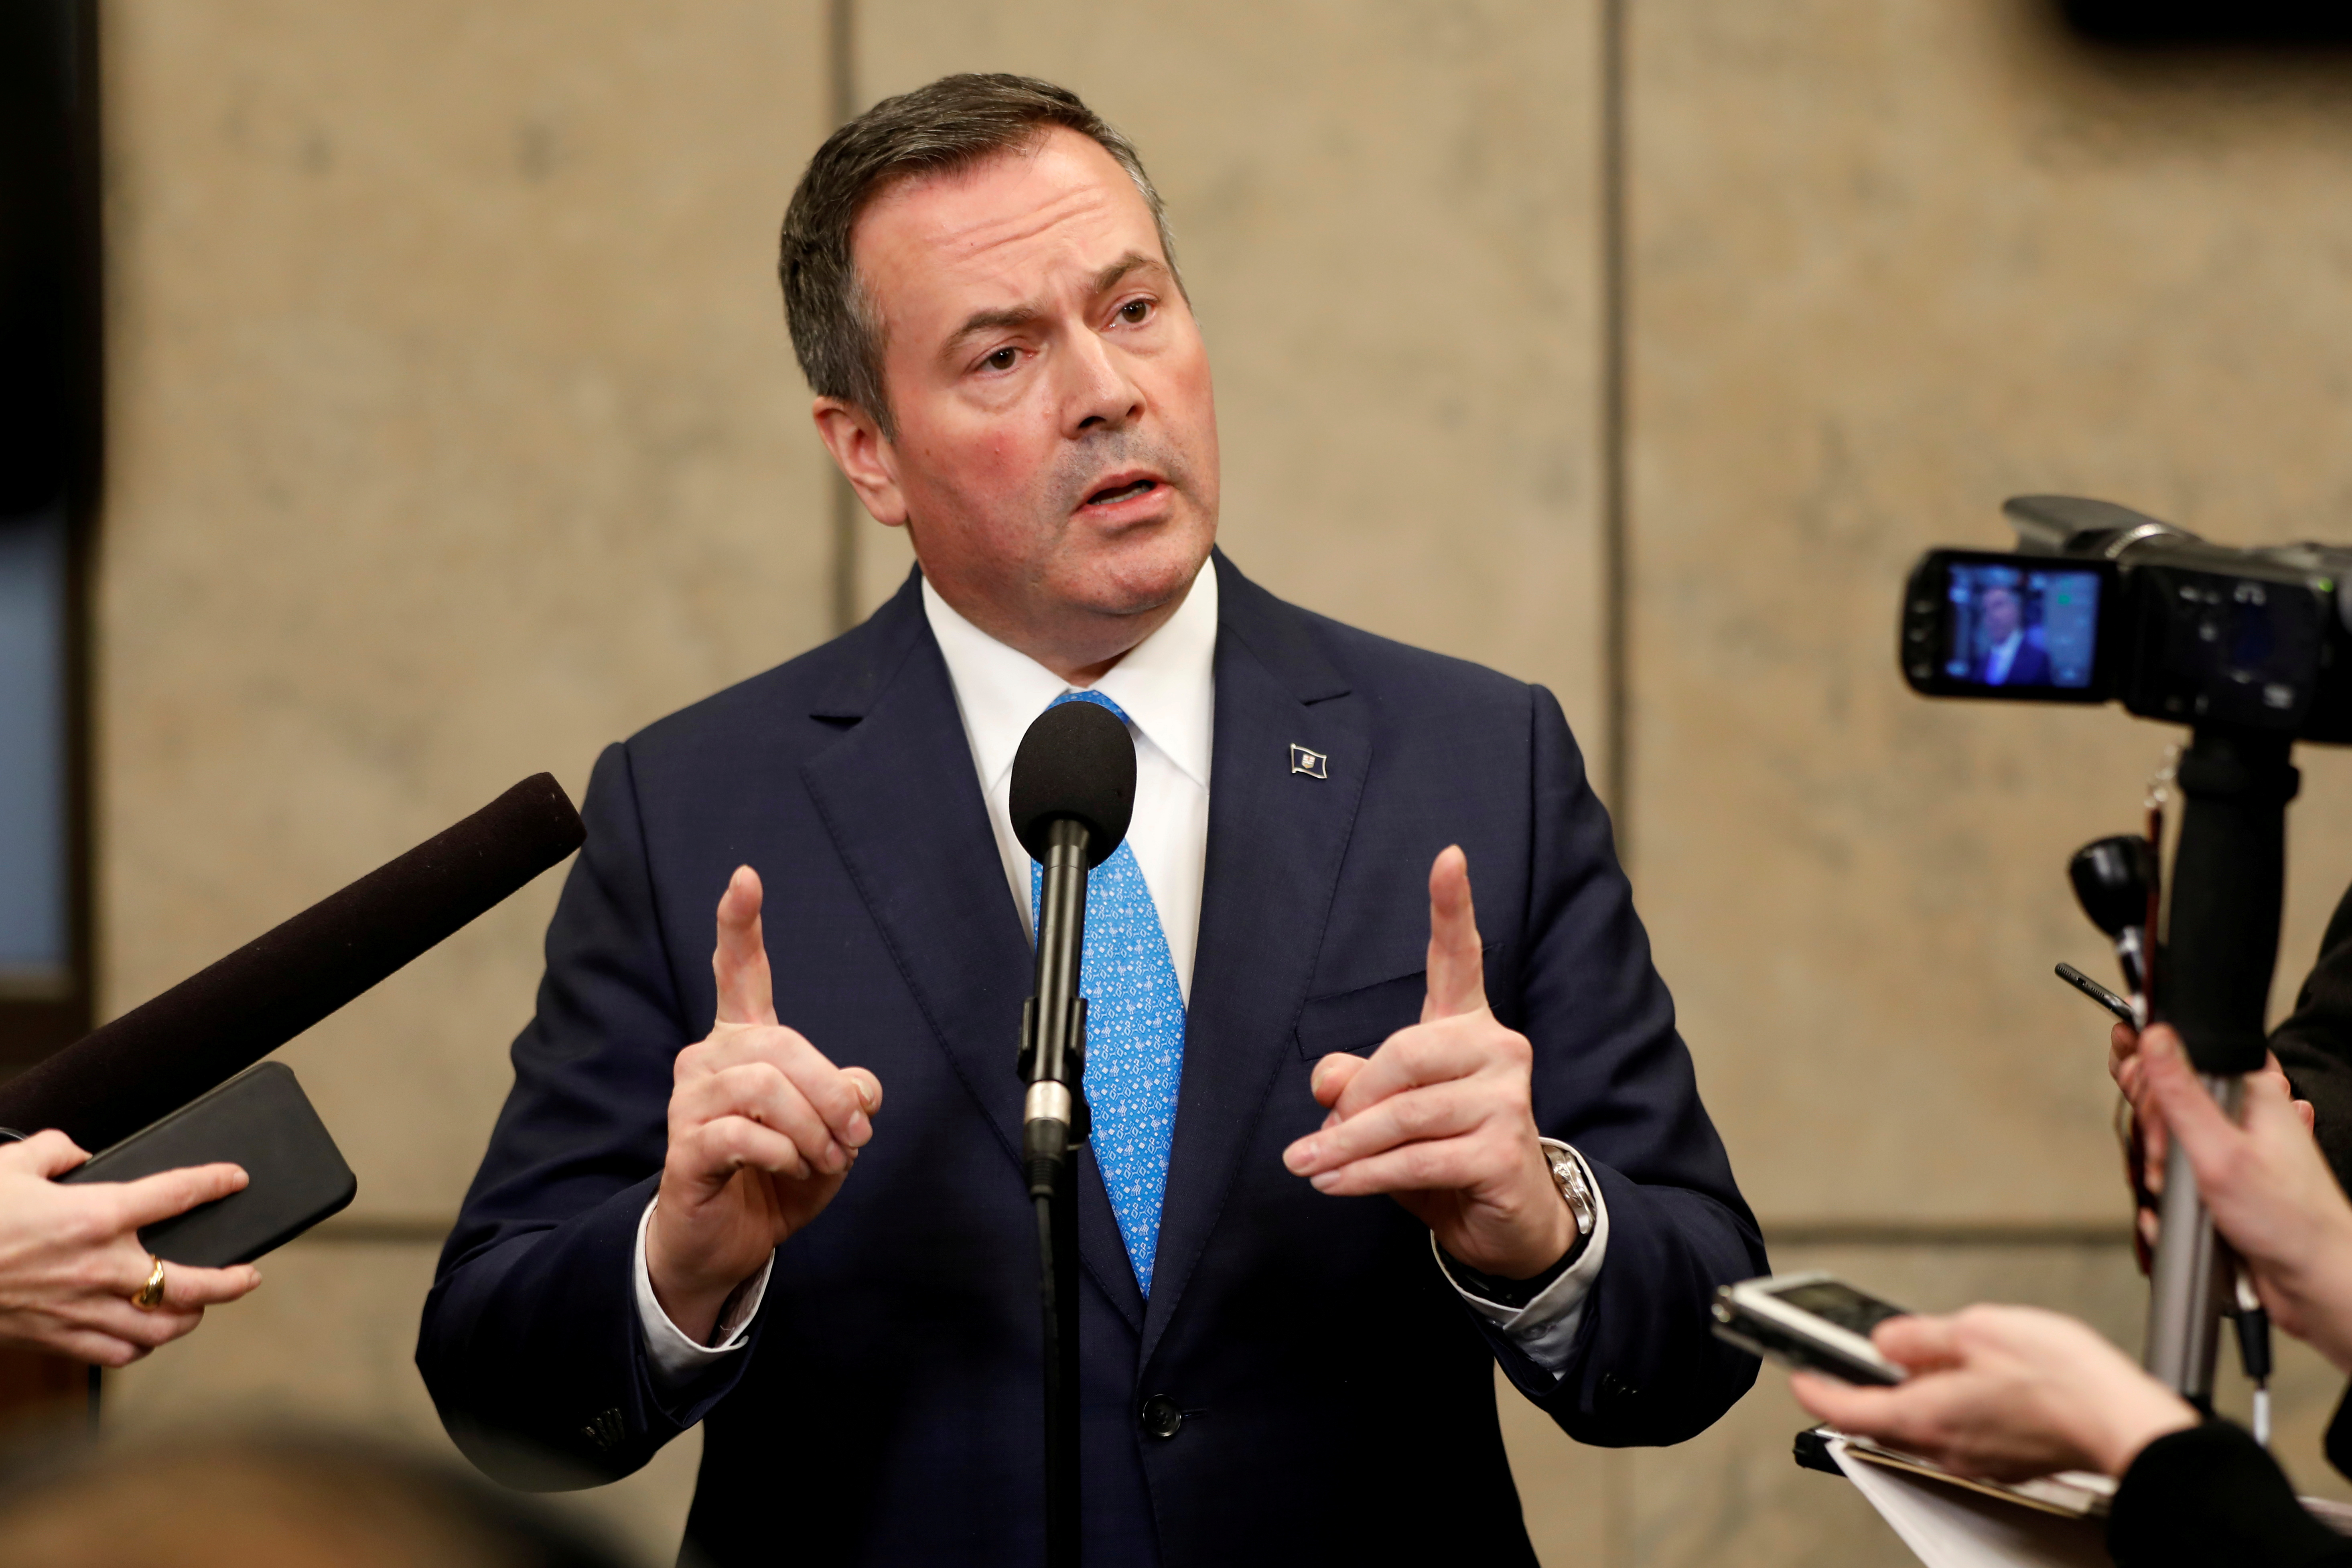 Alberta Premier Jason Kenney speaks during a news conference after meeting with Canada's Prime Minister Justin Trudeau on Parliament Hill in Ottawa, Ontario, Canada December 10, 2019. REUTERS/Blair Gable/File Photo